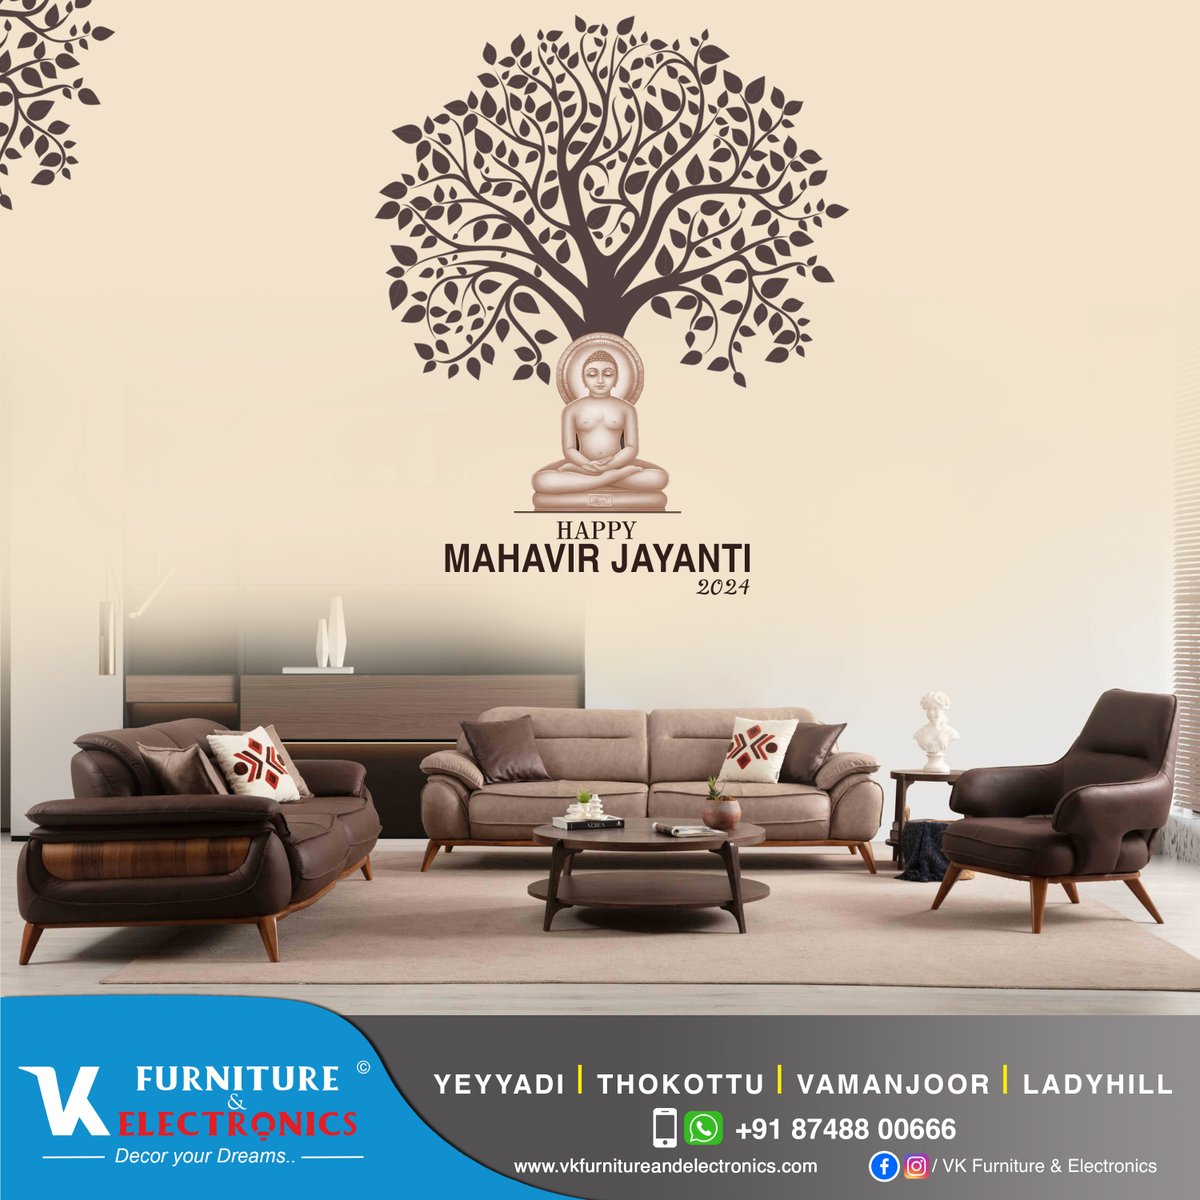 May Lord Mahavir bless you abundantly and fill your life with the virtue of truth, non-violence and external compassion.

#mahaveerajayanti #VKFurnitureandElectronics
#vkgroups #vksofamakers #instagrampost #vkyeyyadi
#vkvamanjoor #VKFurnitureandElectronic